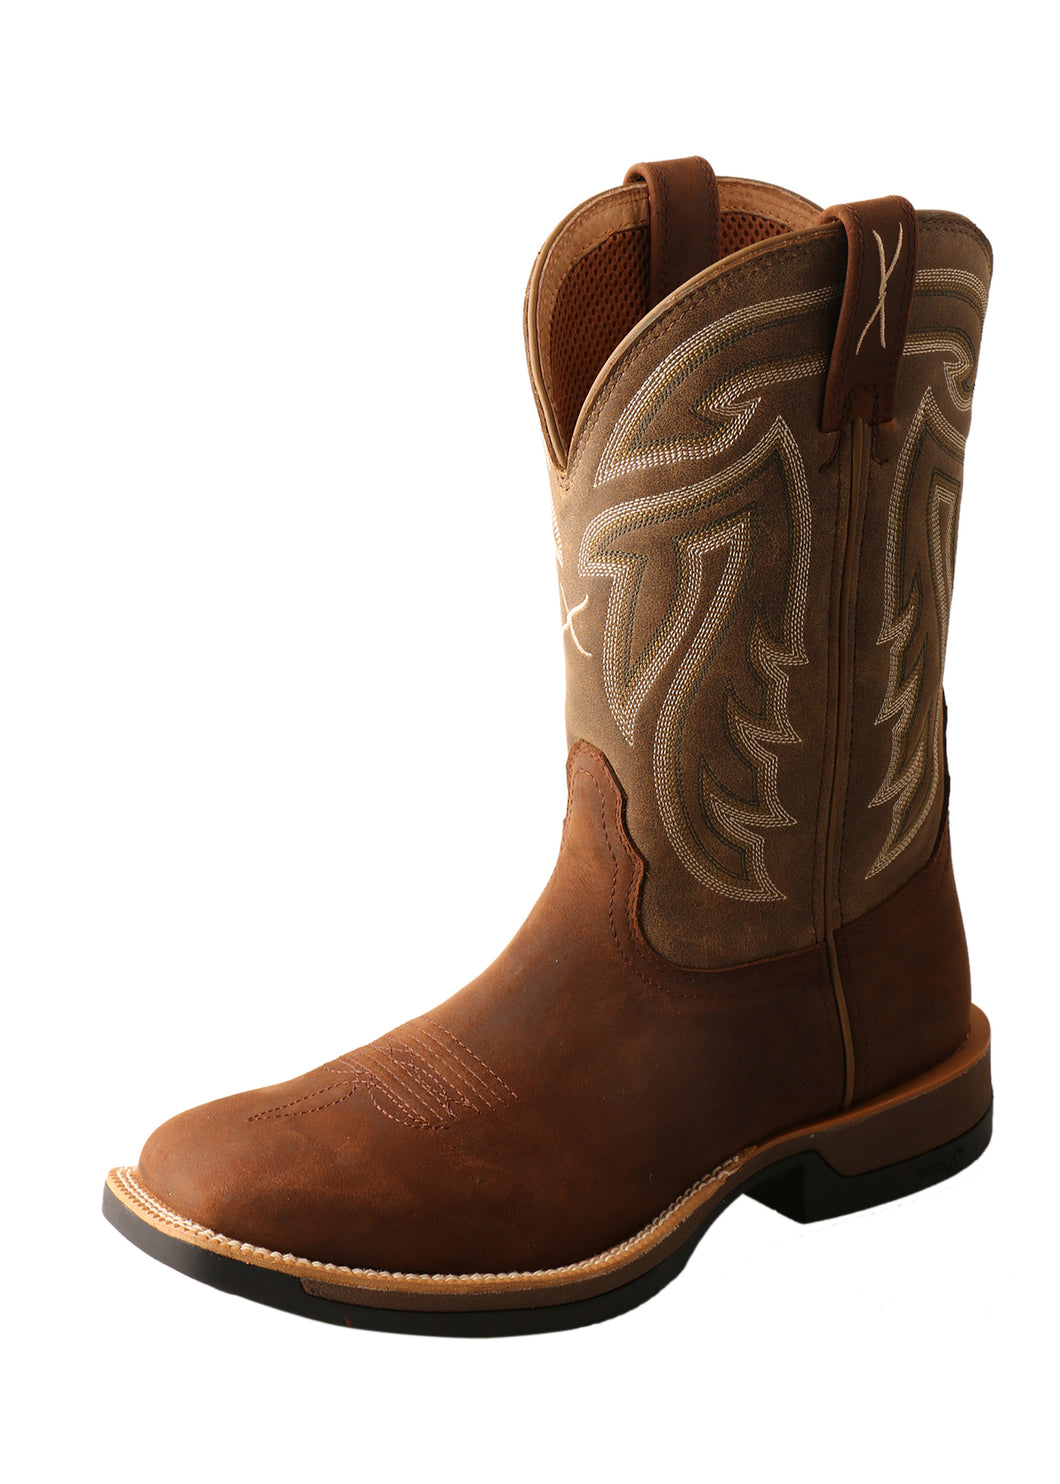 TWISTED X MENS 11 INCH TECH X BOOT